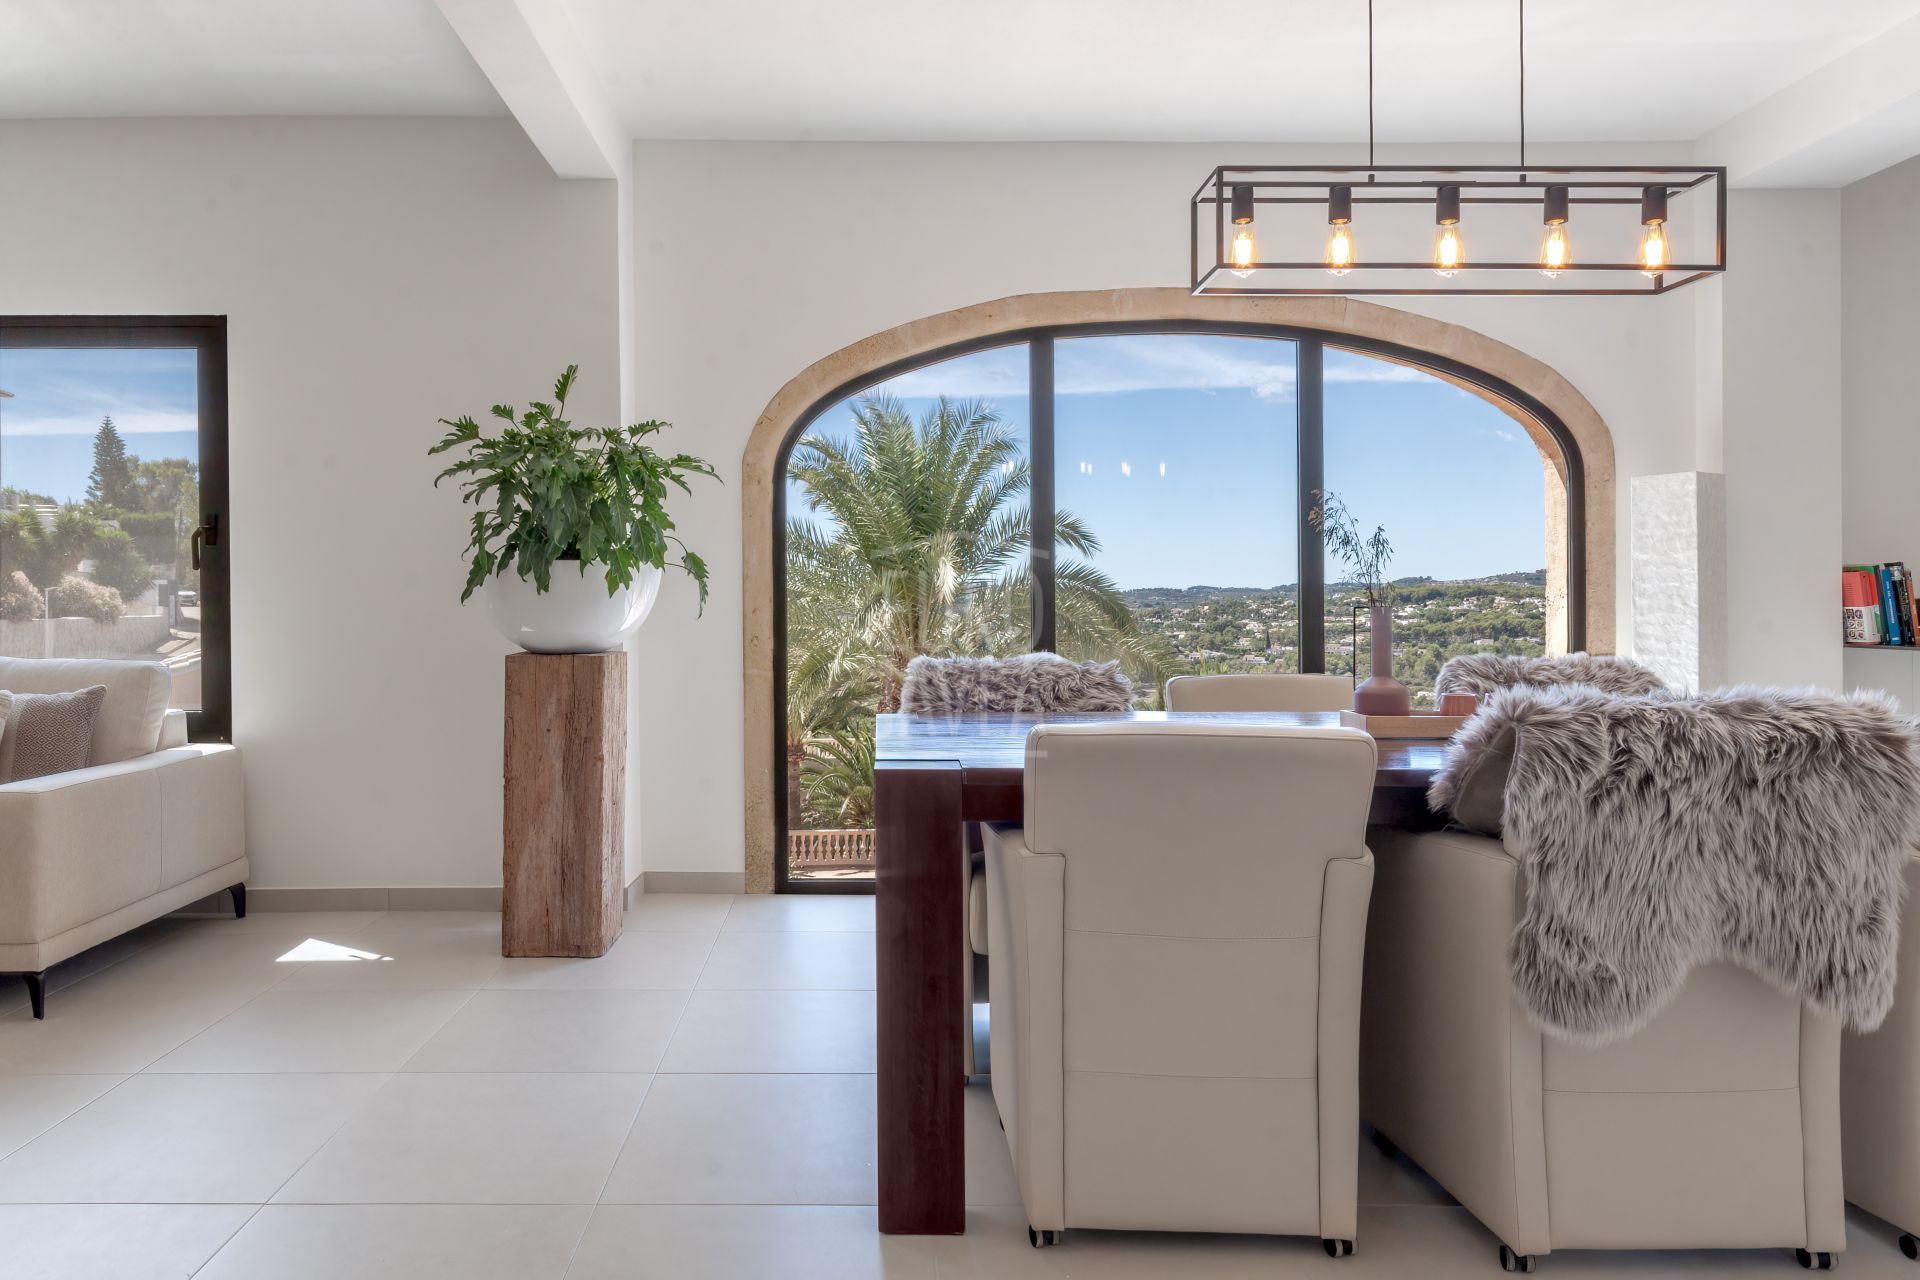 Spectacular fully renovated villa for sale exclusively in the Rafalet area in Jávea, facing south with magnificent open and valley views